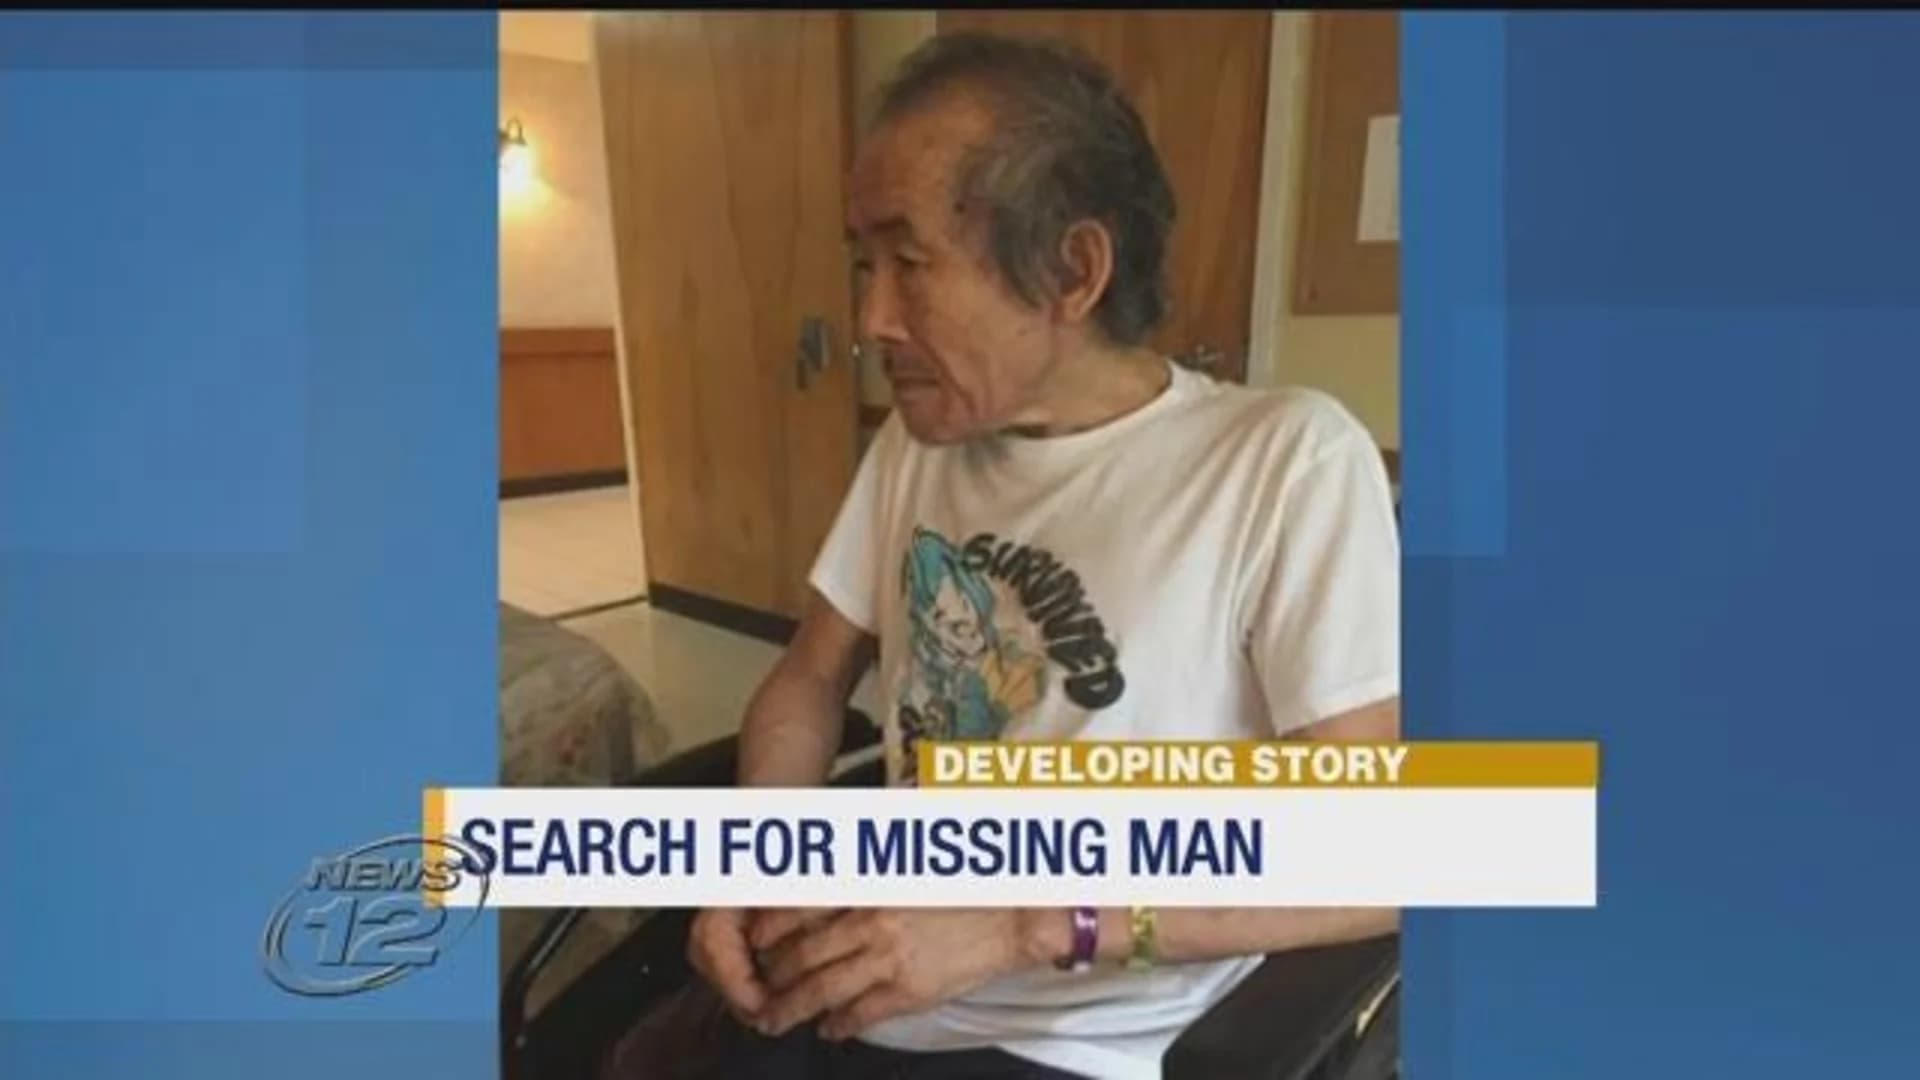 Police search for missing man with dementia